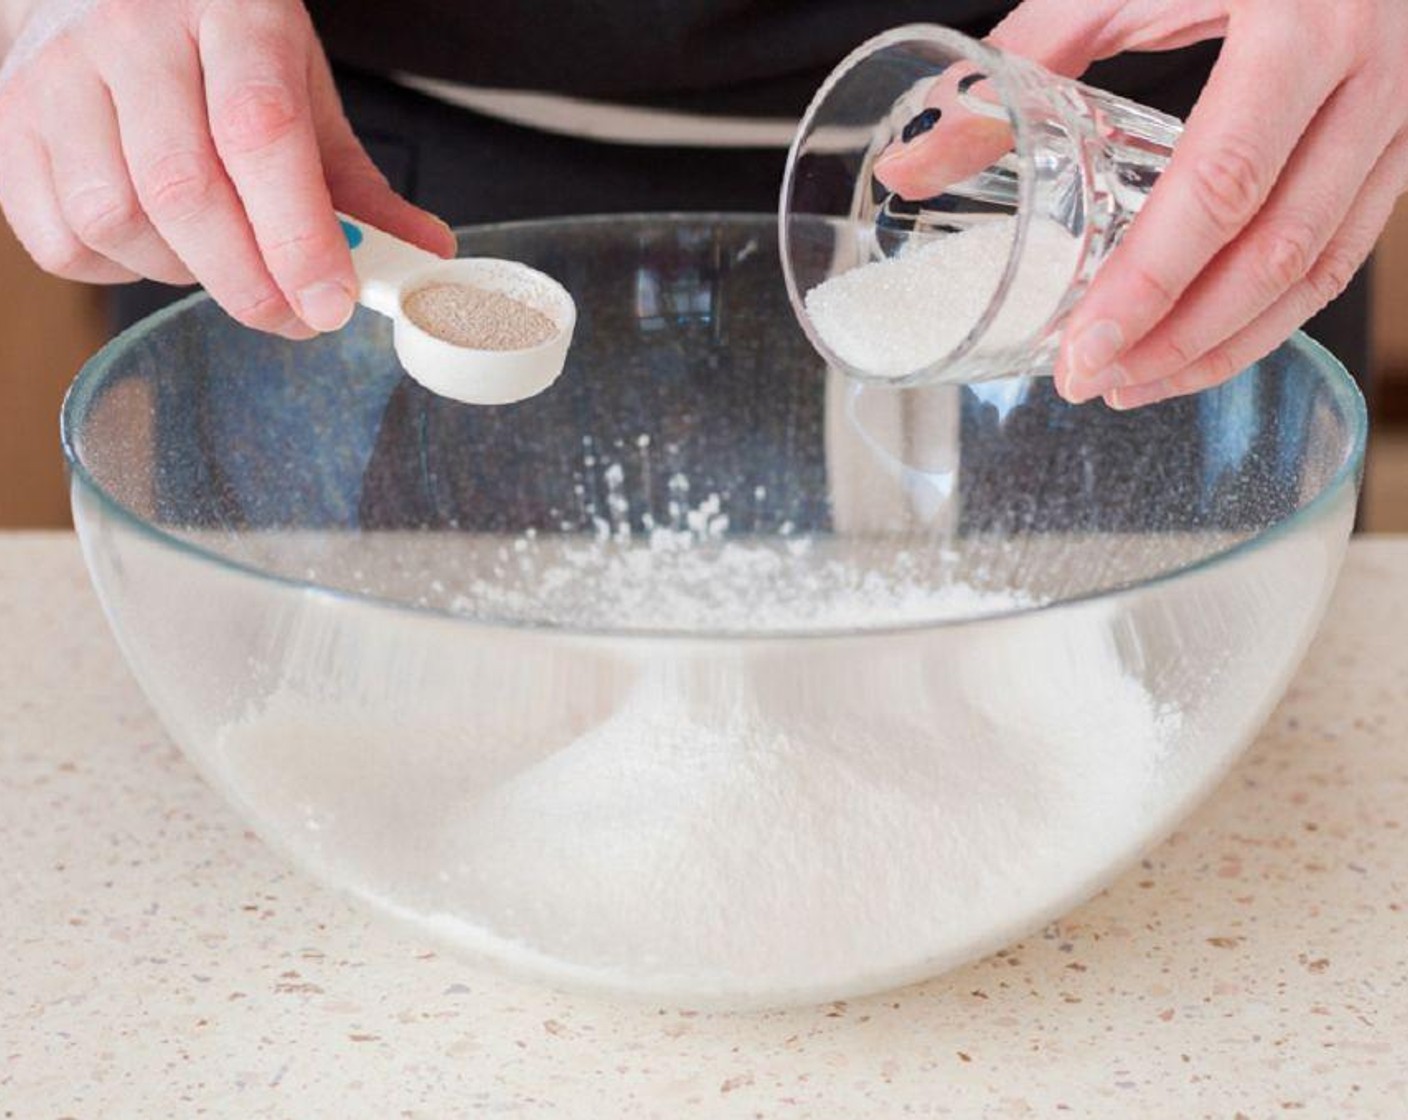 step 1 Whisk Milk (2 cups) and an additional 2 tablespoons of milk together with the Eggs (6), Active Dry Yeast (1 Tbsp), Granulated Sugar (2 cups), melted Unsalted Butter (1 cup), Salt (1/2 tsp), Sour Cream (1/2 cup), and Vanilla Extract (1 tsp) in one large mixing bowl.